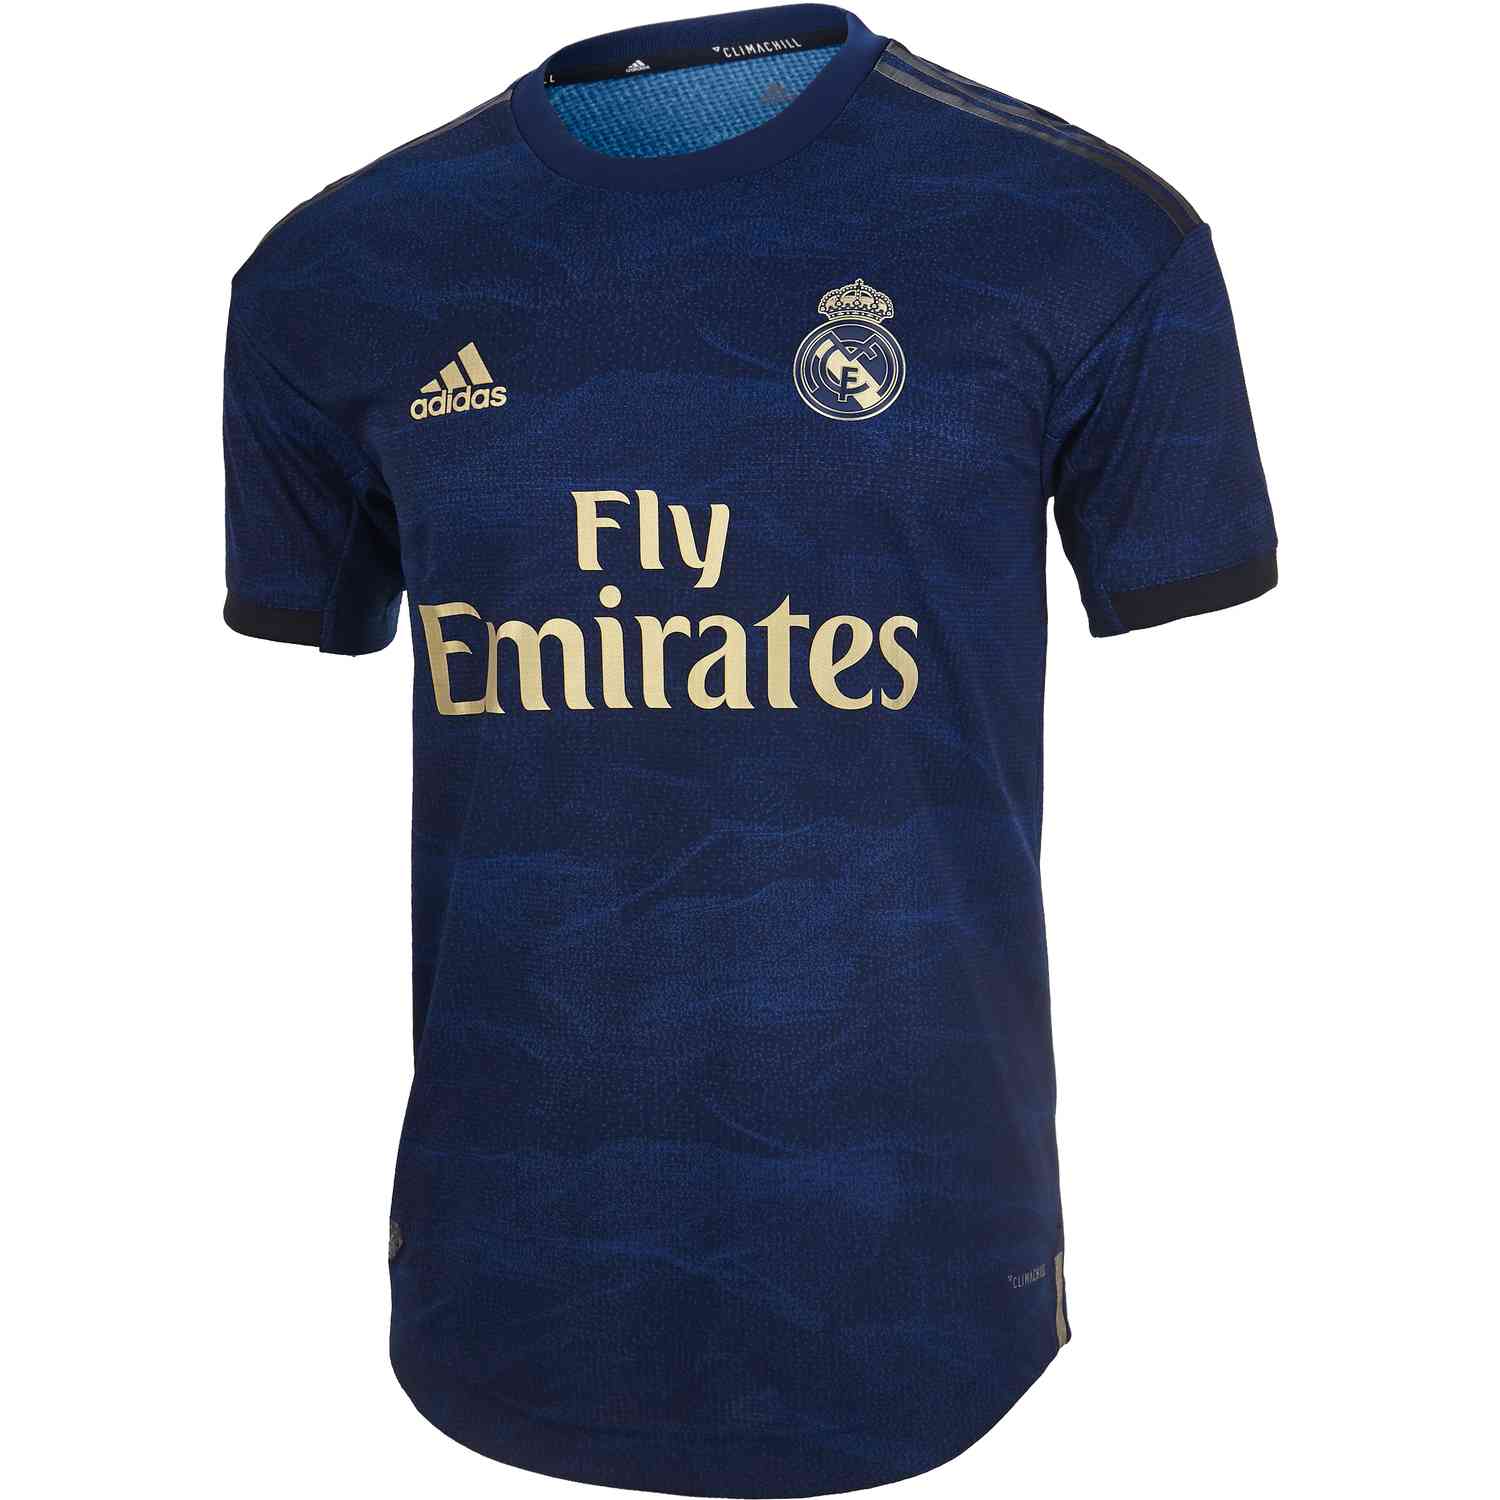 Real Madrid Official 2019 2020 Hazard Jersey Champions League Edition Shirt